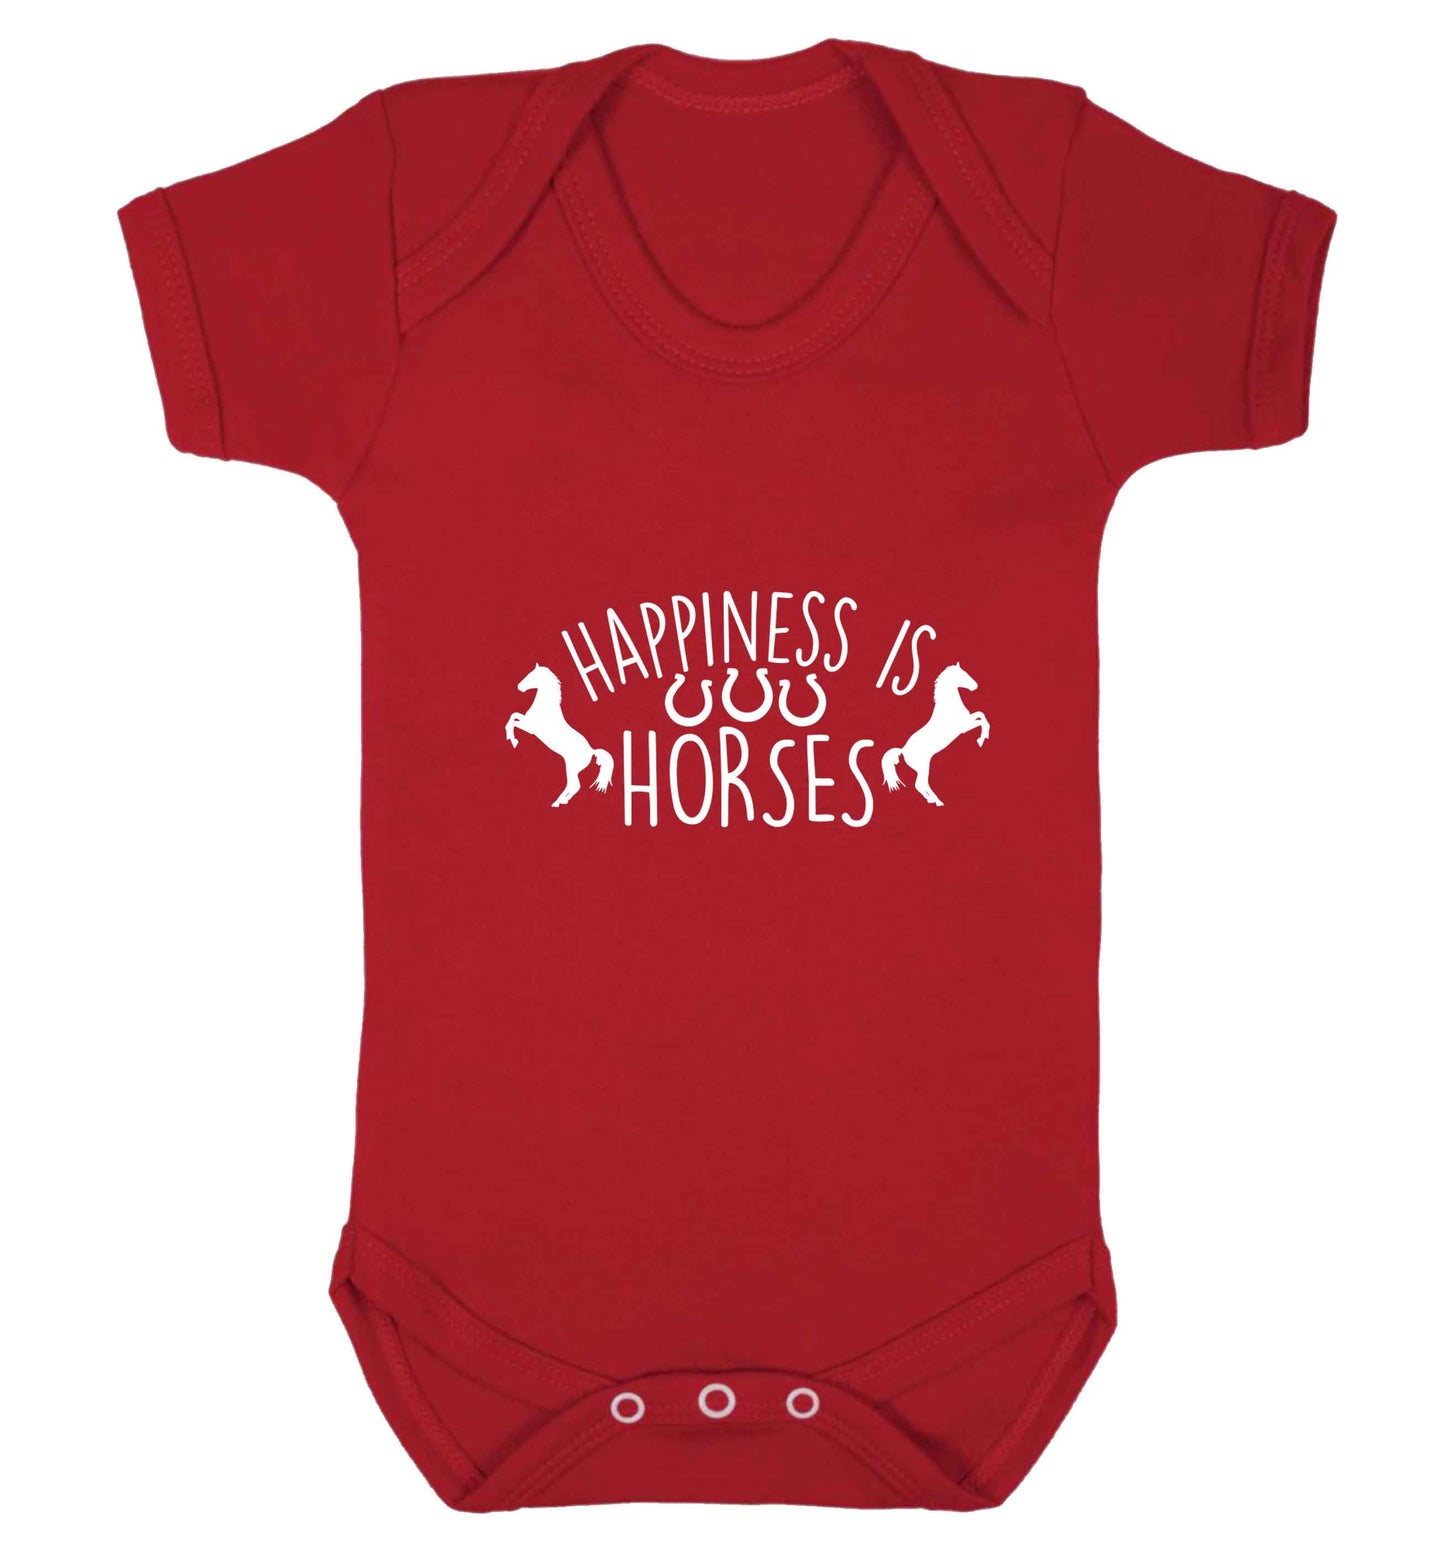 Happiness is horses baby vest red 18-24 months